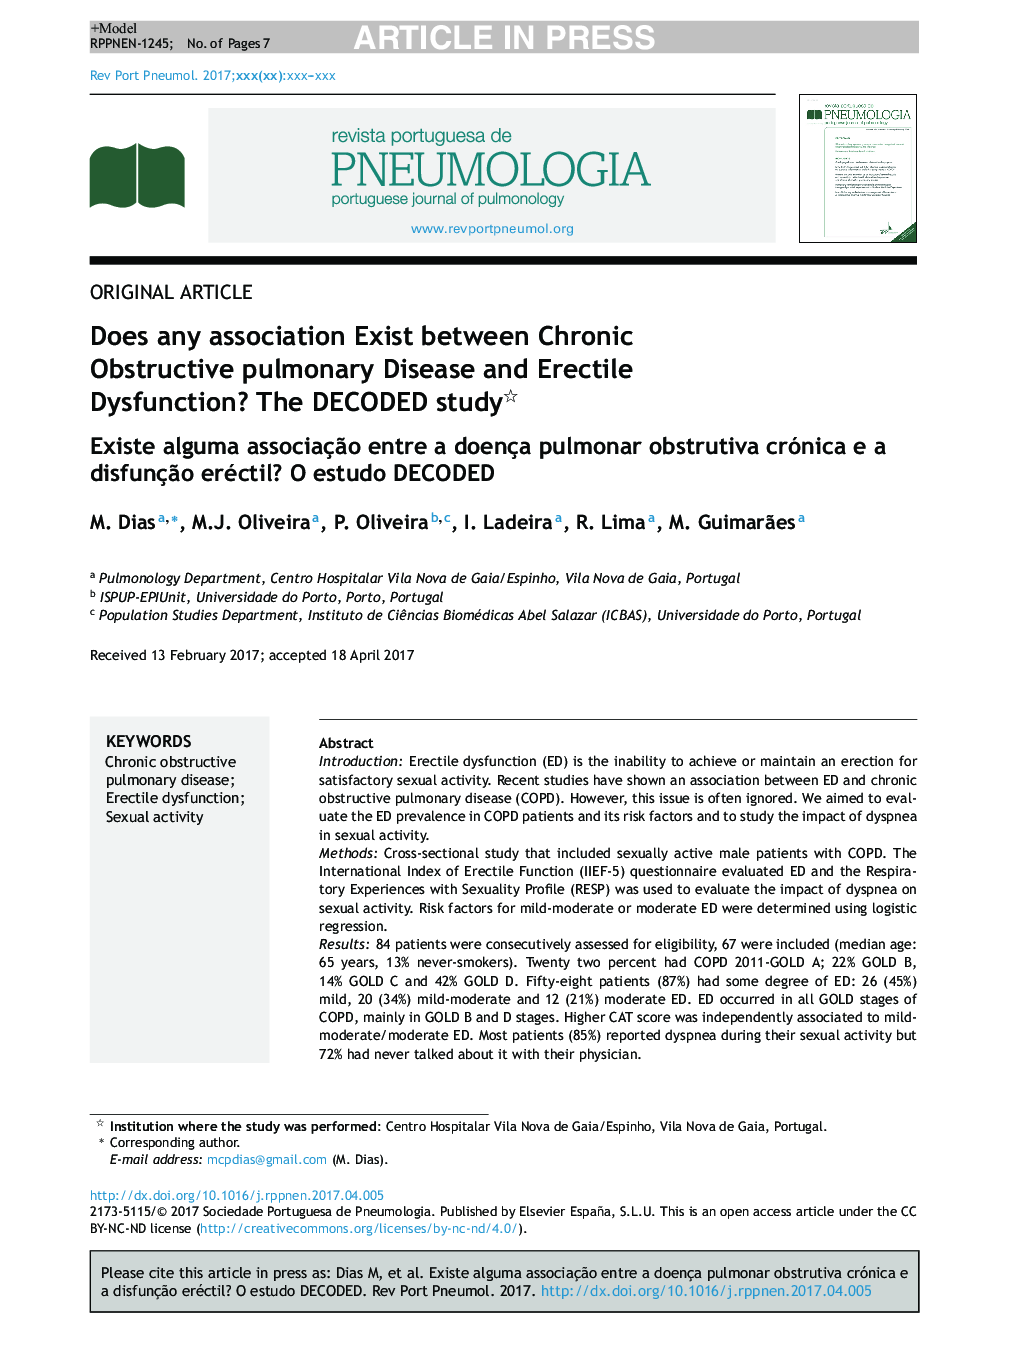 Does any association exist between Chronic Obstructive Pulmonary Disease and Erectile Dysfunction? The DECODED study